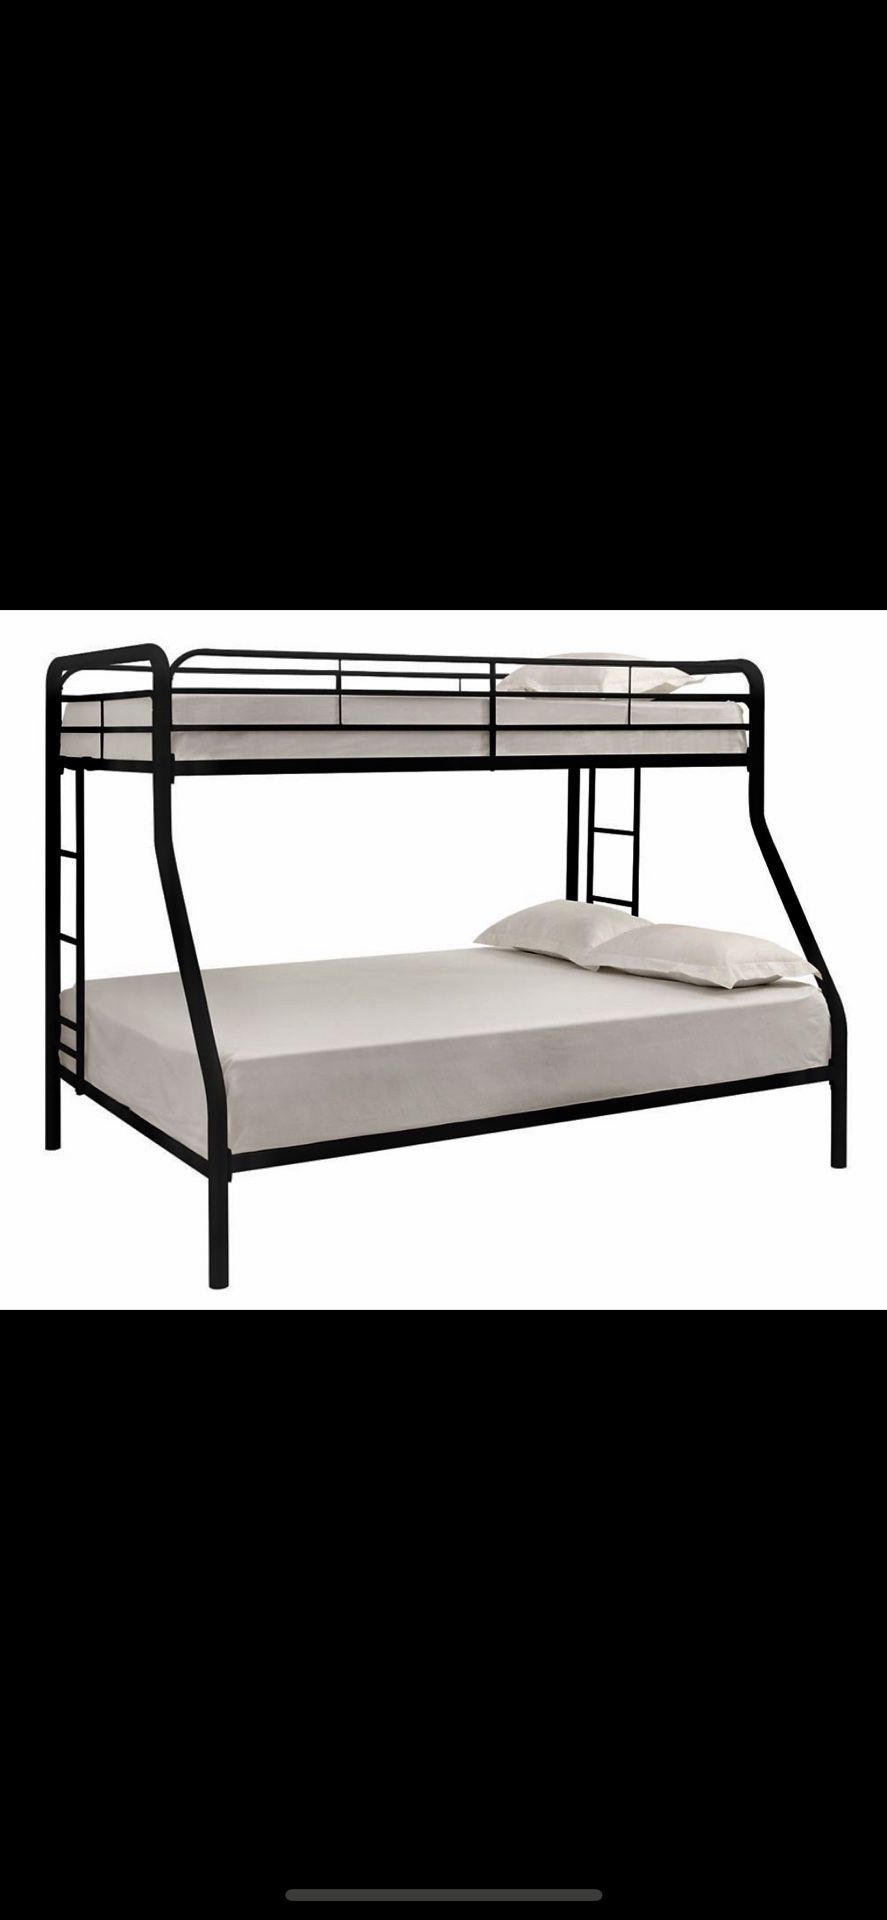 Brand new Twin Full Bunk Bed